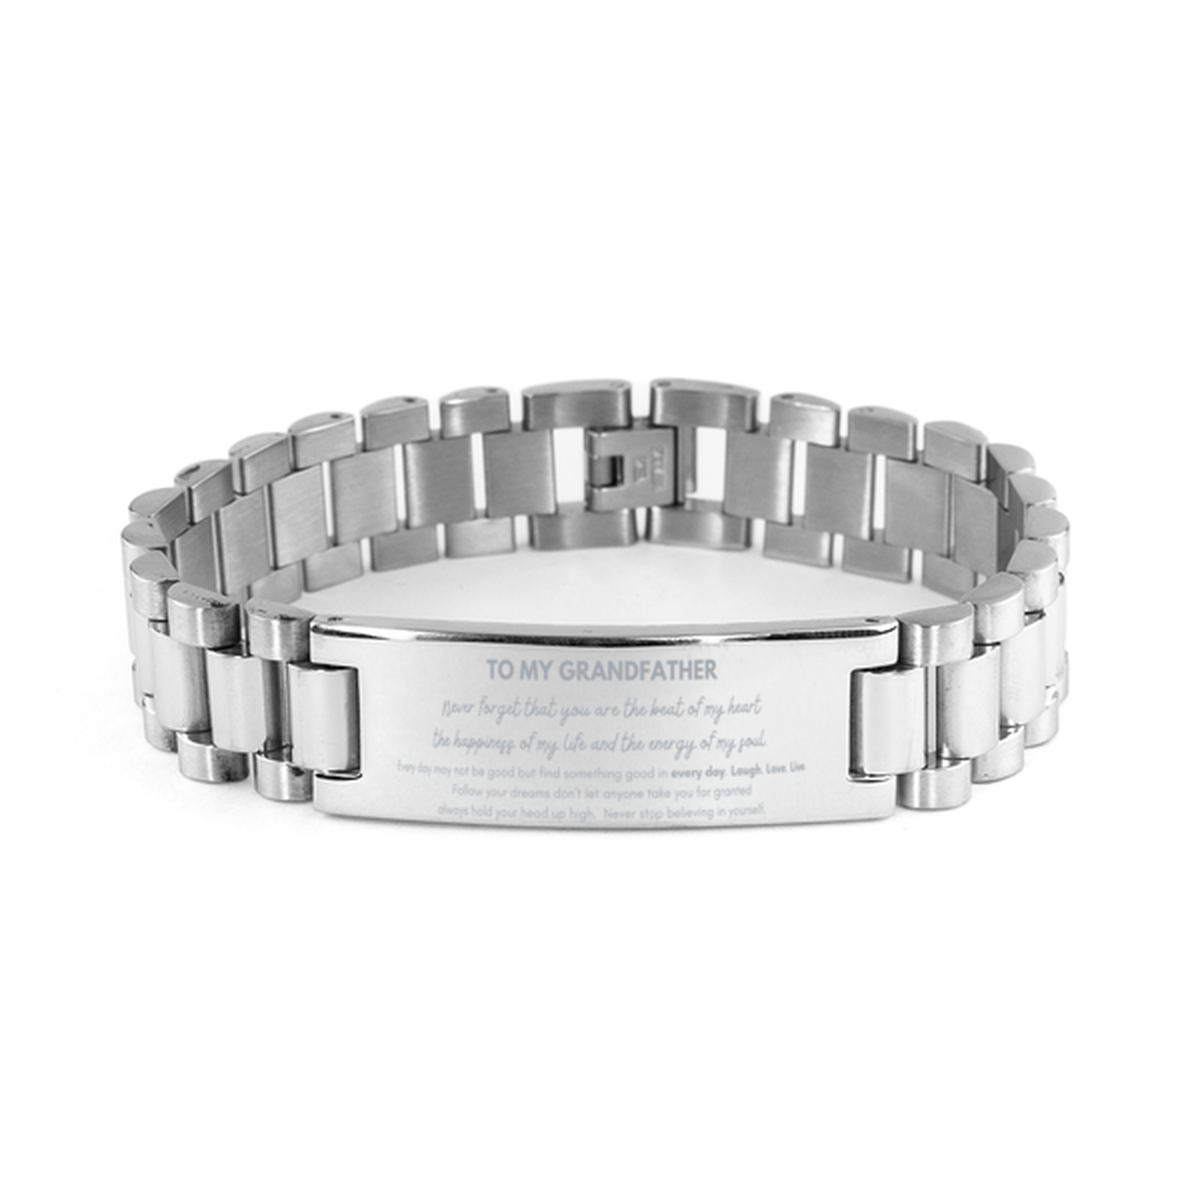 To My Grandfather Bracelet Gifts, Christmas Grandfather Ladder Stainless Steel Bracelet Present, Birthday Unique Motivational For Grandfather, To My Grandfather Never forget that you are the beat of my heart the happiness of my life and the energy of my s